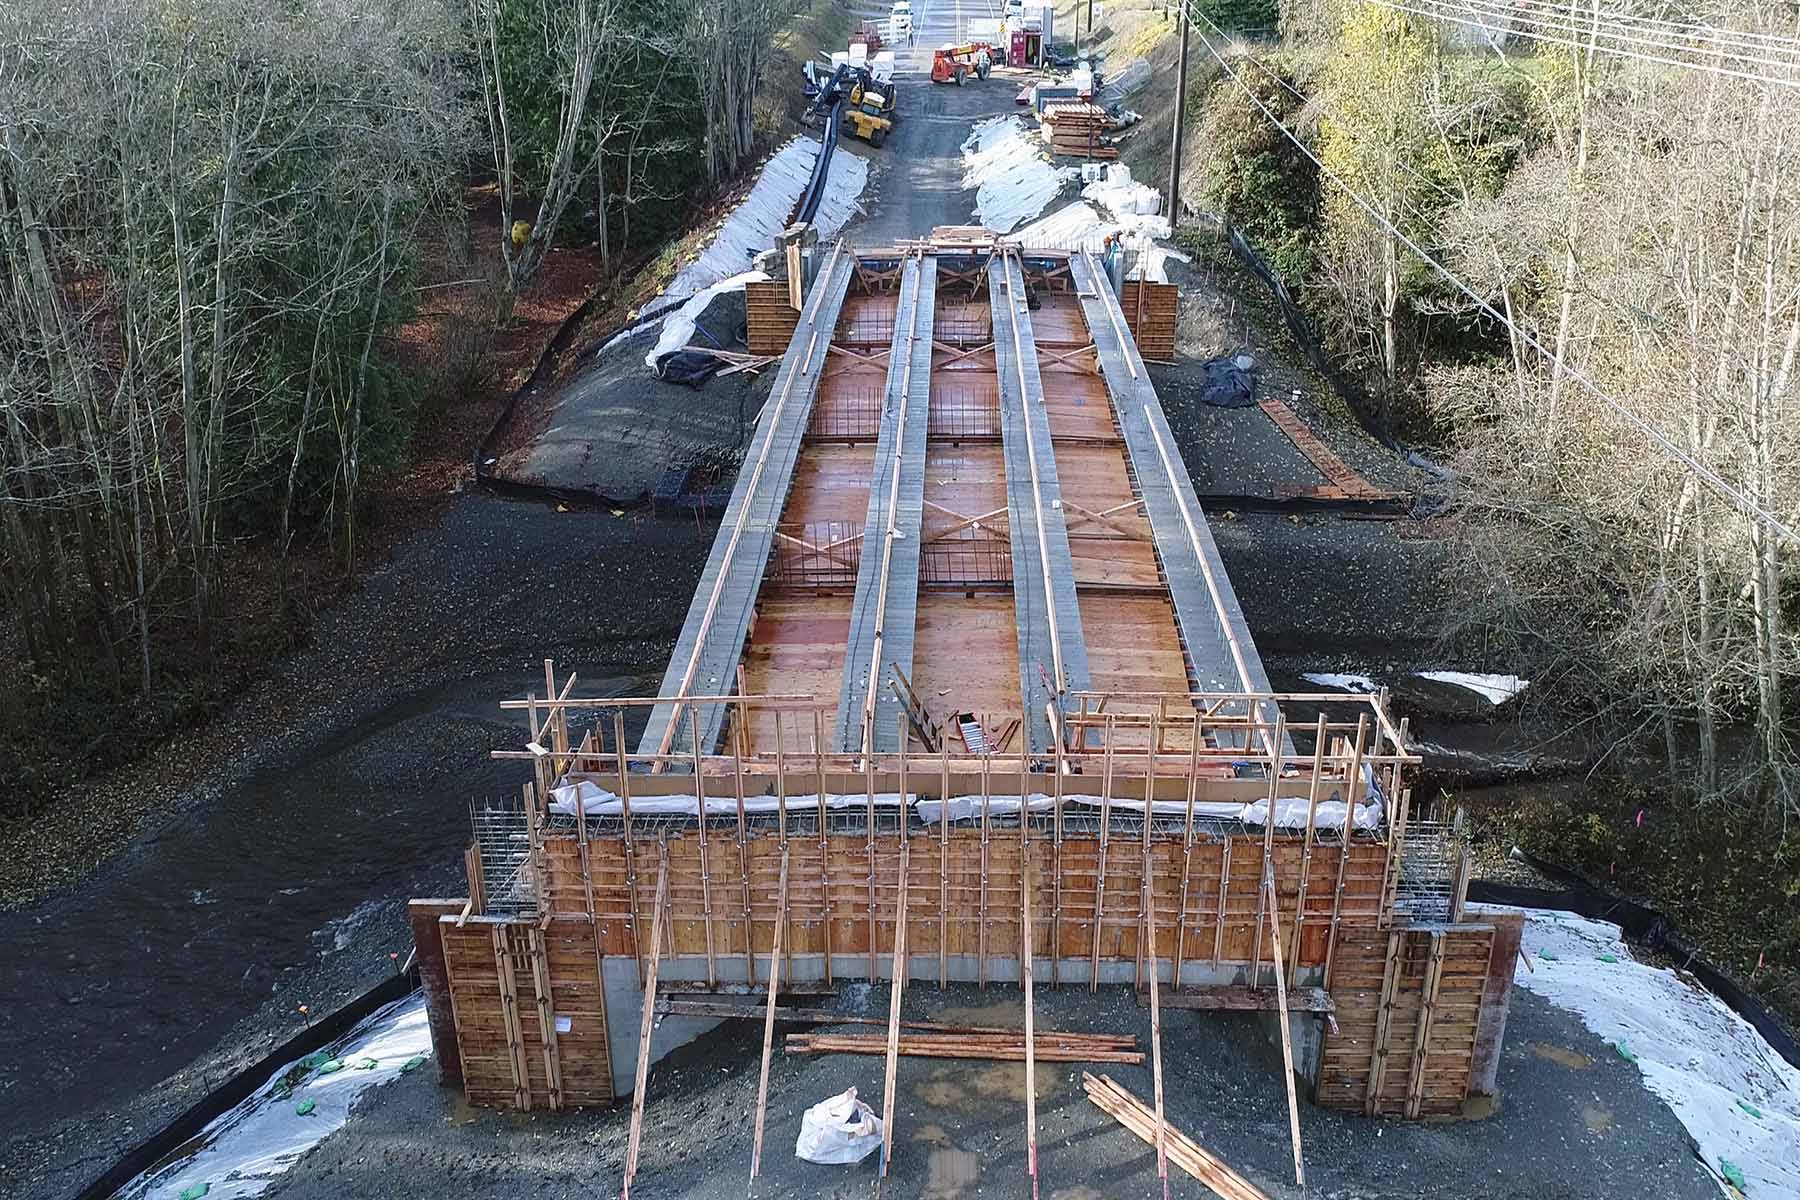 Christopher Enges with Spirit Vision Films captures a shot of construction for the Old Olympic Highway bridge in early November with his drone. Submitted photo